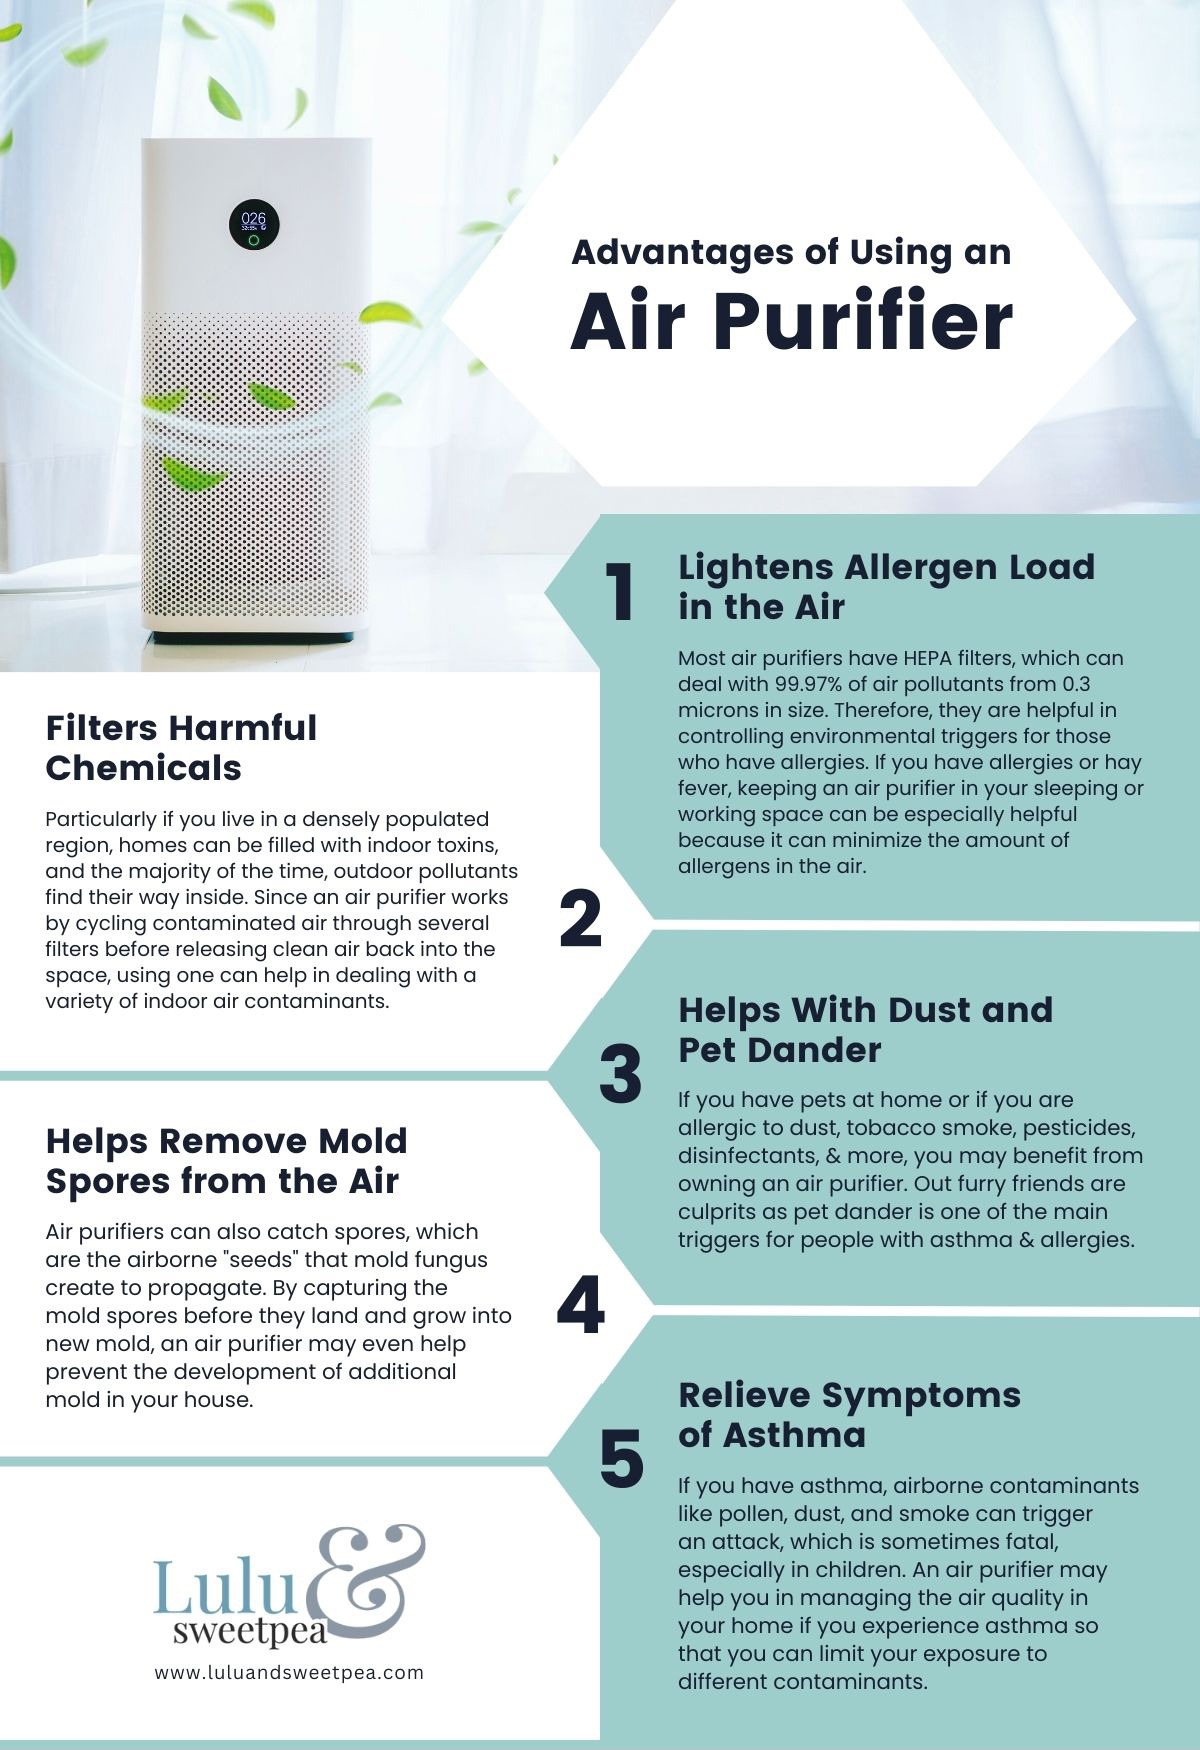 An explanation of the benefits of using an air purifier